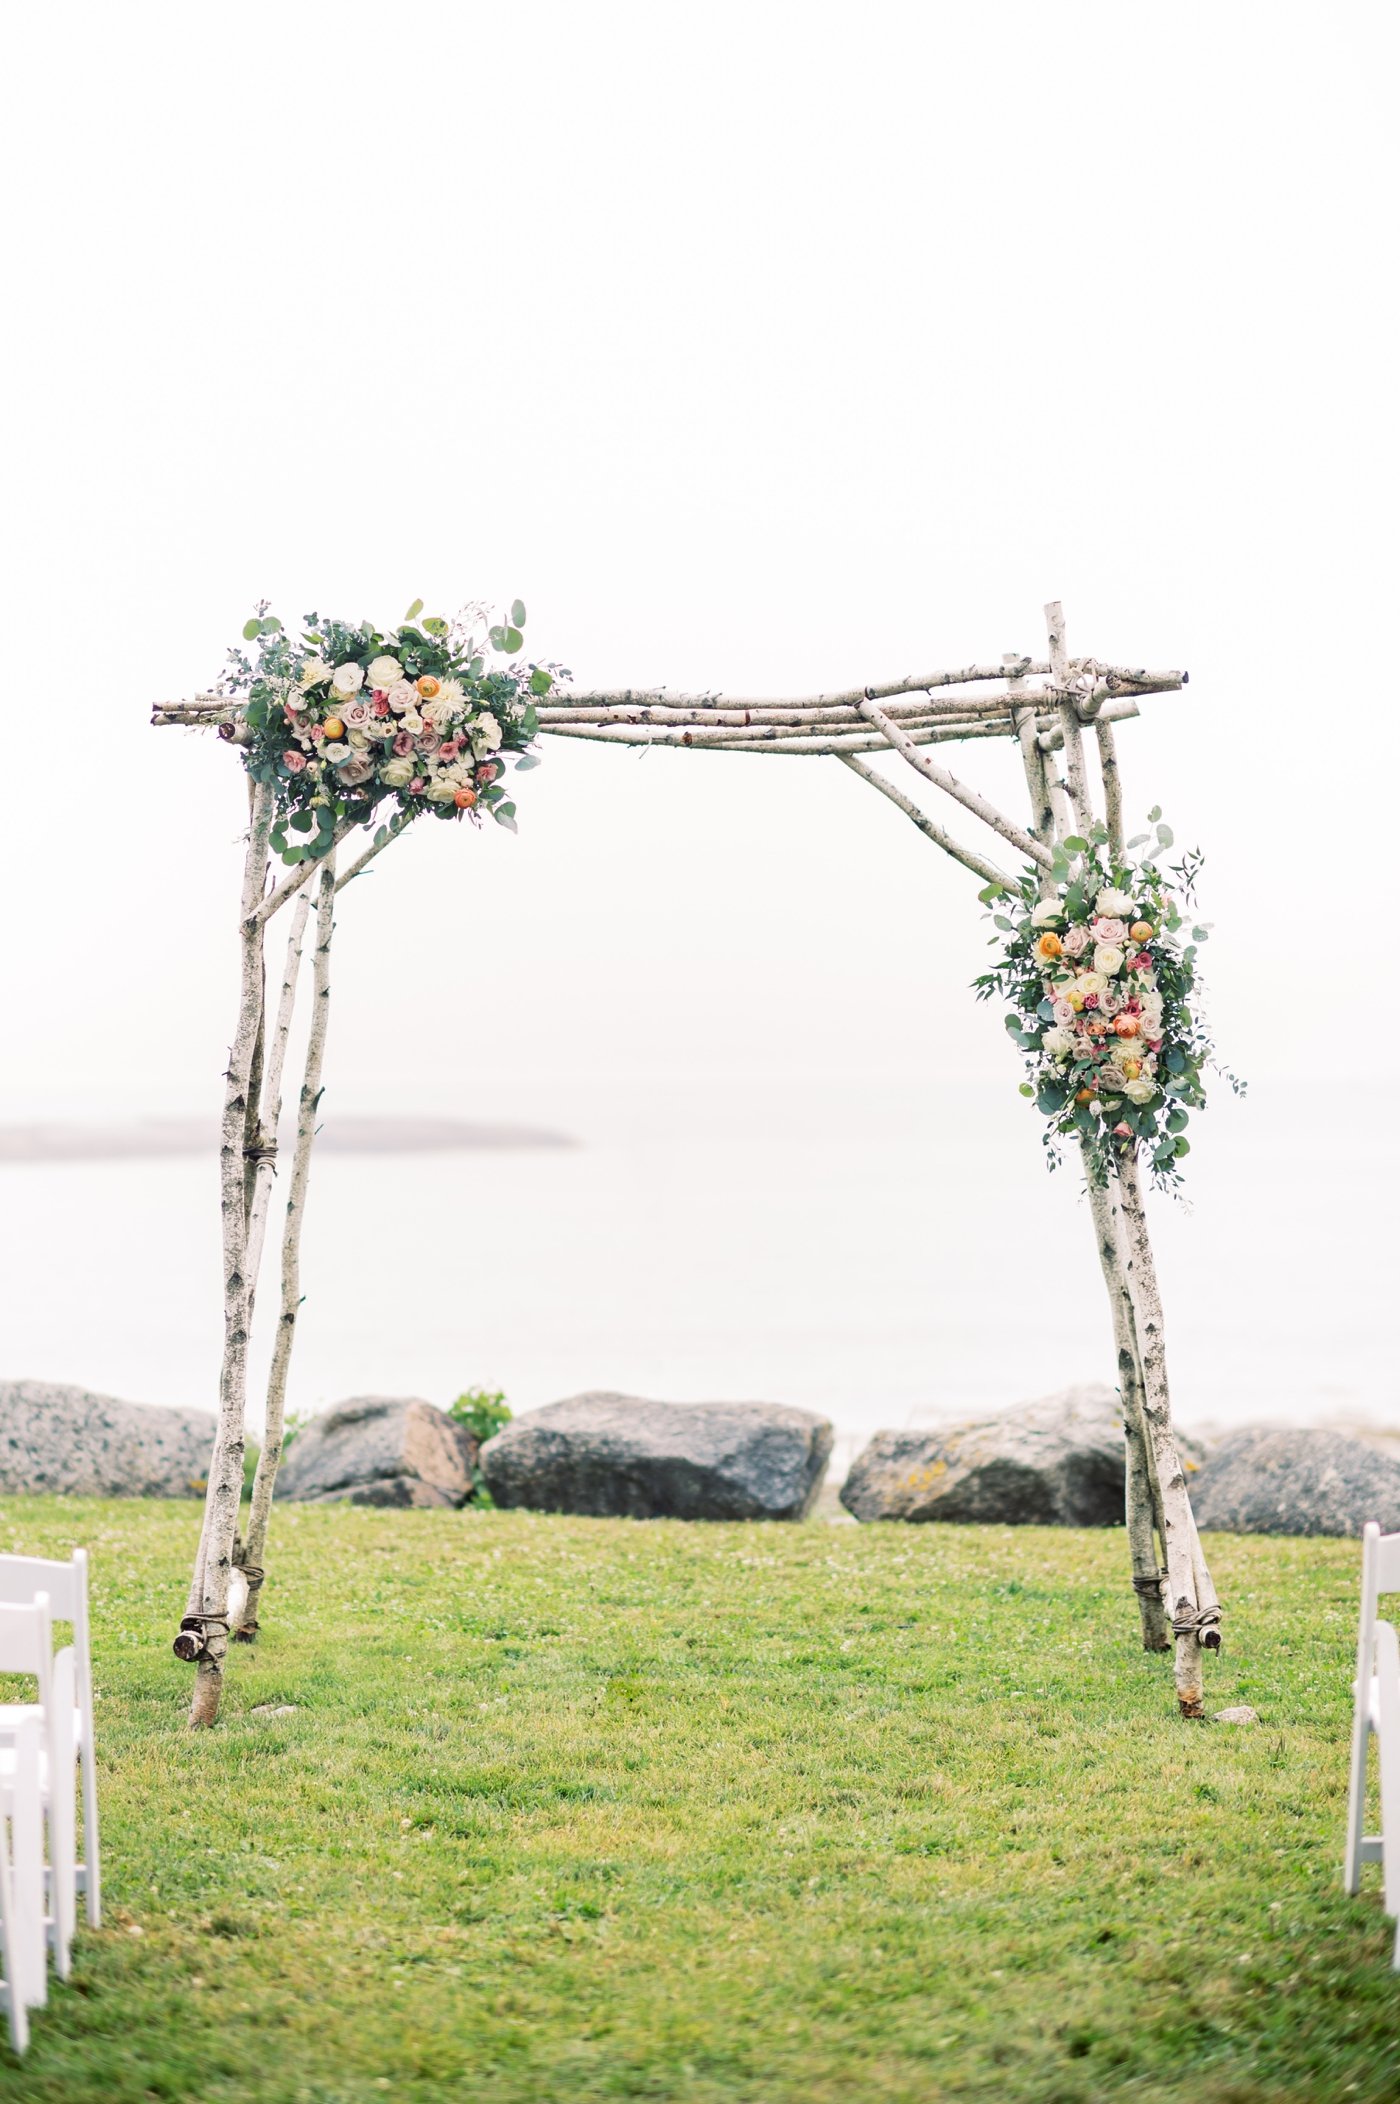 Birchwood wedding arch with eucalyptus and pink flowers at a seaside wedding ceremony